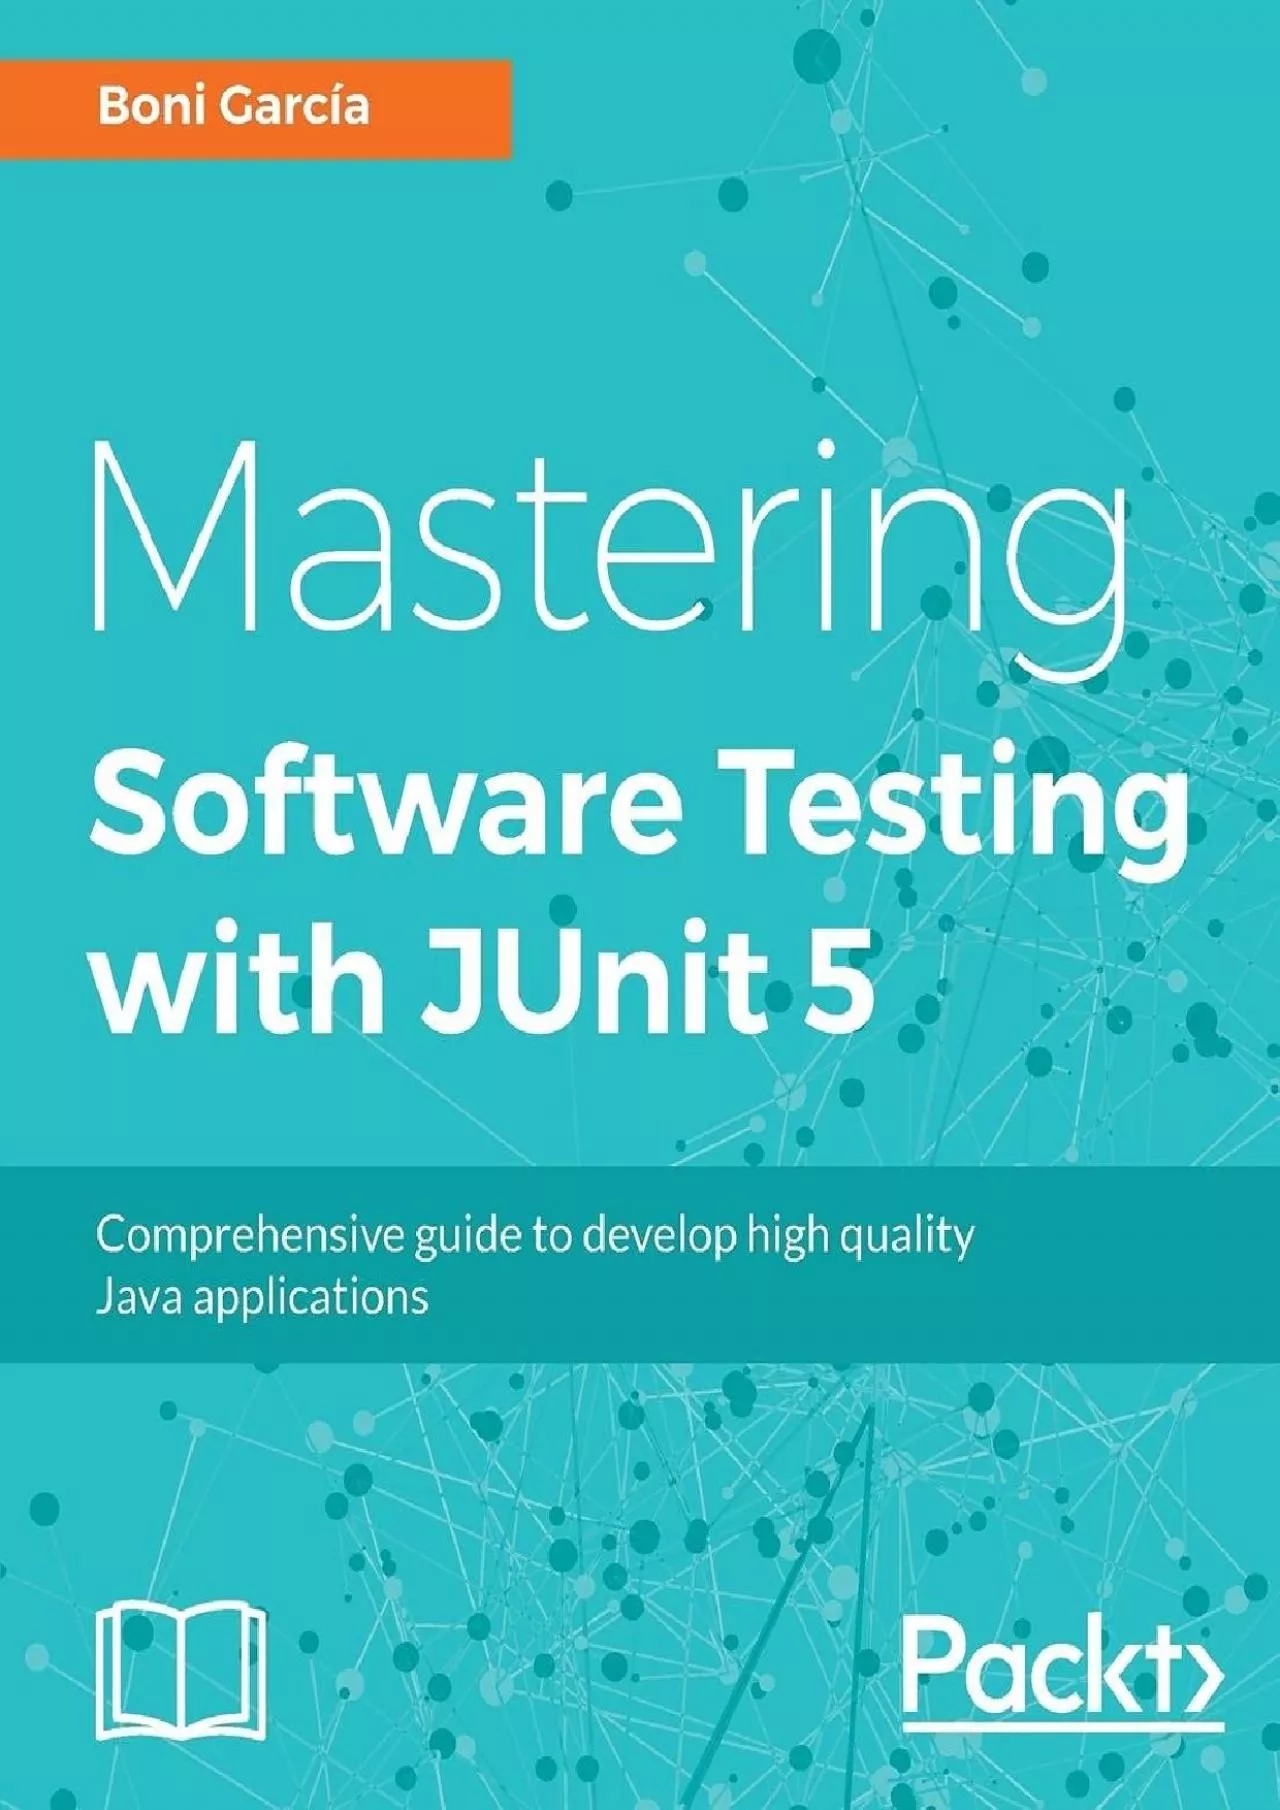 [eBOOK]-Mastering Software Testing with JUnit 5: Comprehensive guide to develop high quality